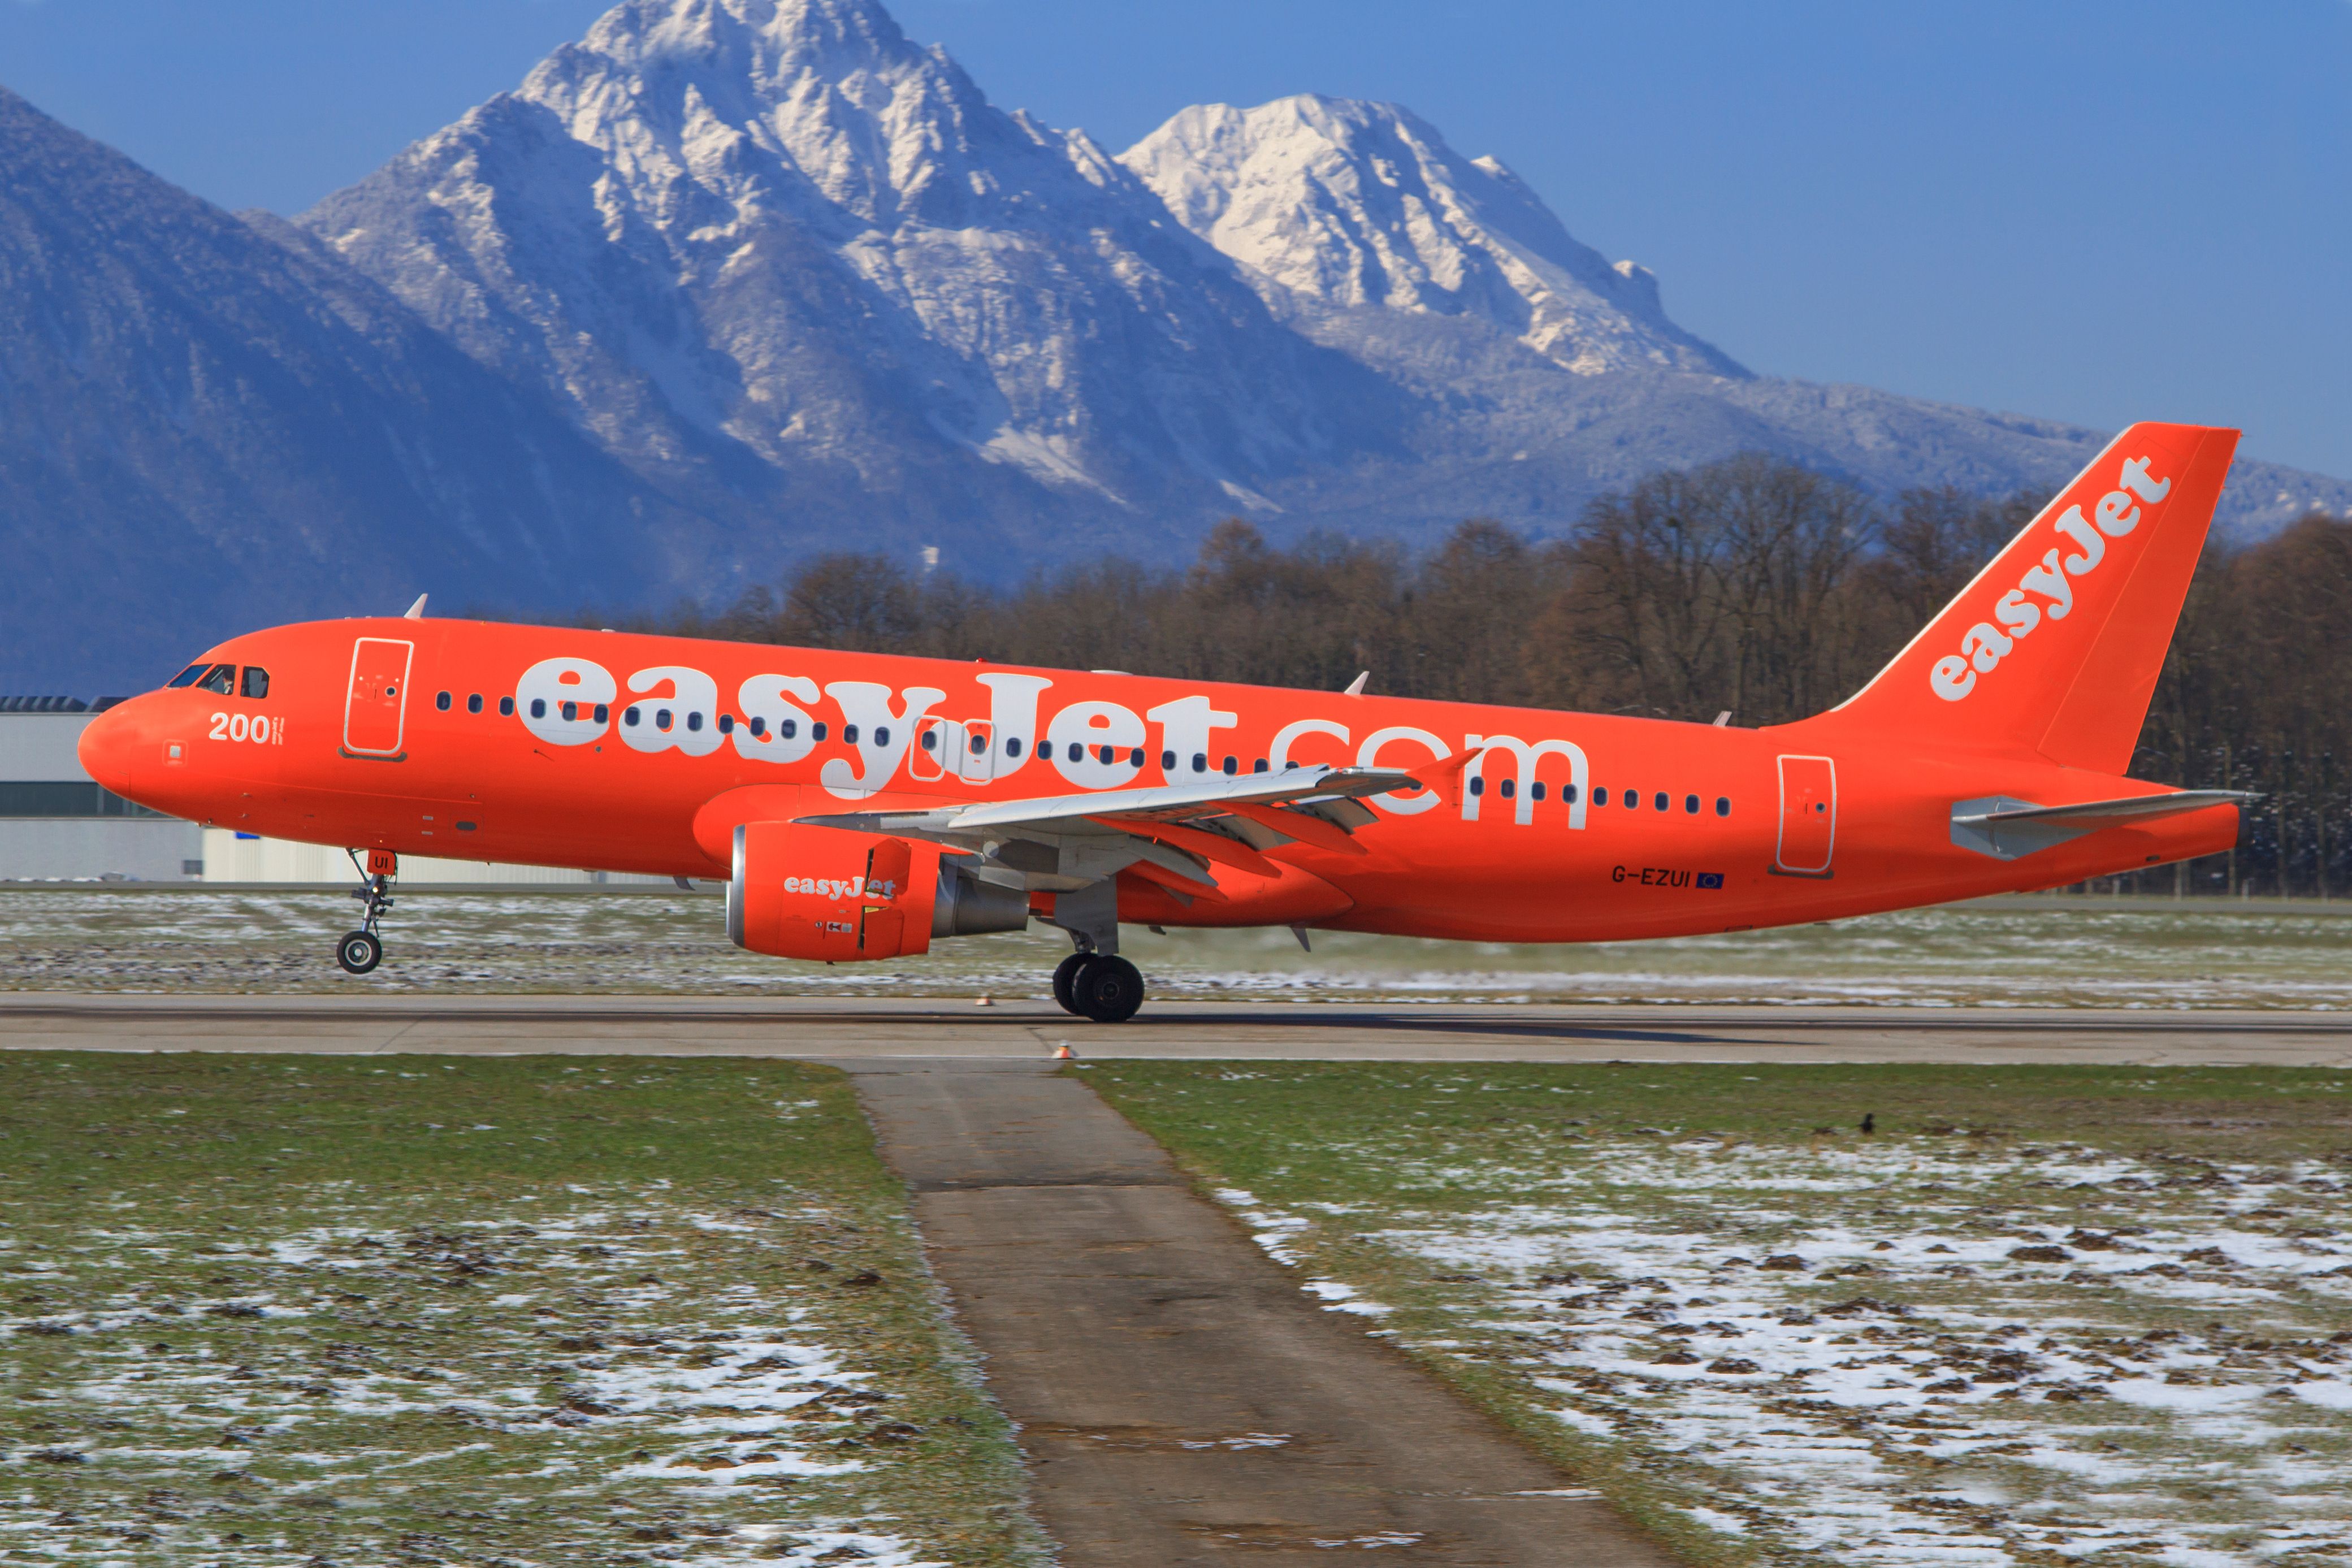 An easyJet Airbus A320 in All-Orange Livery just about to takeoff.